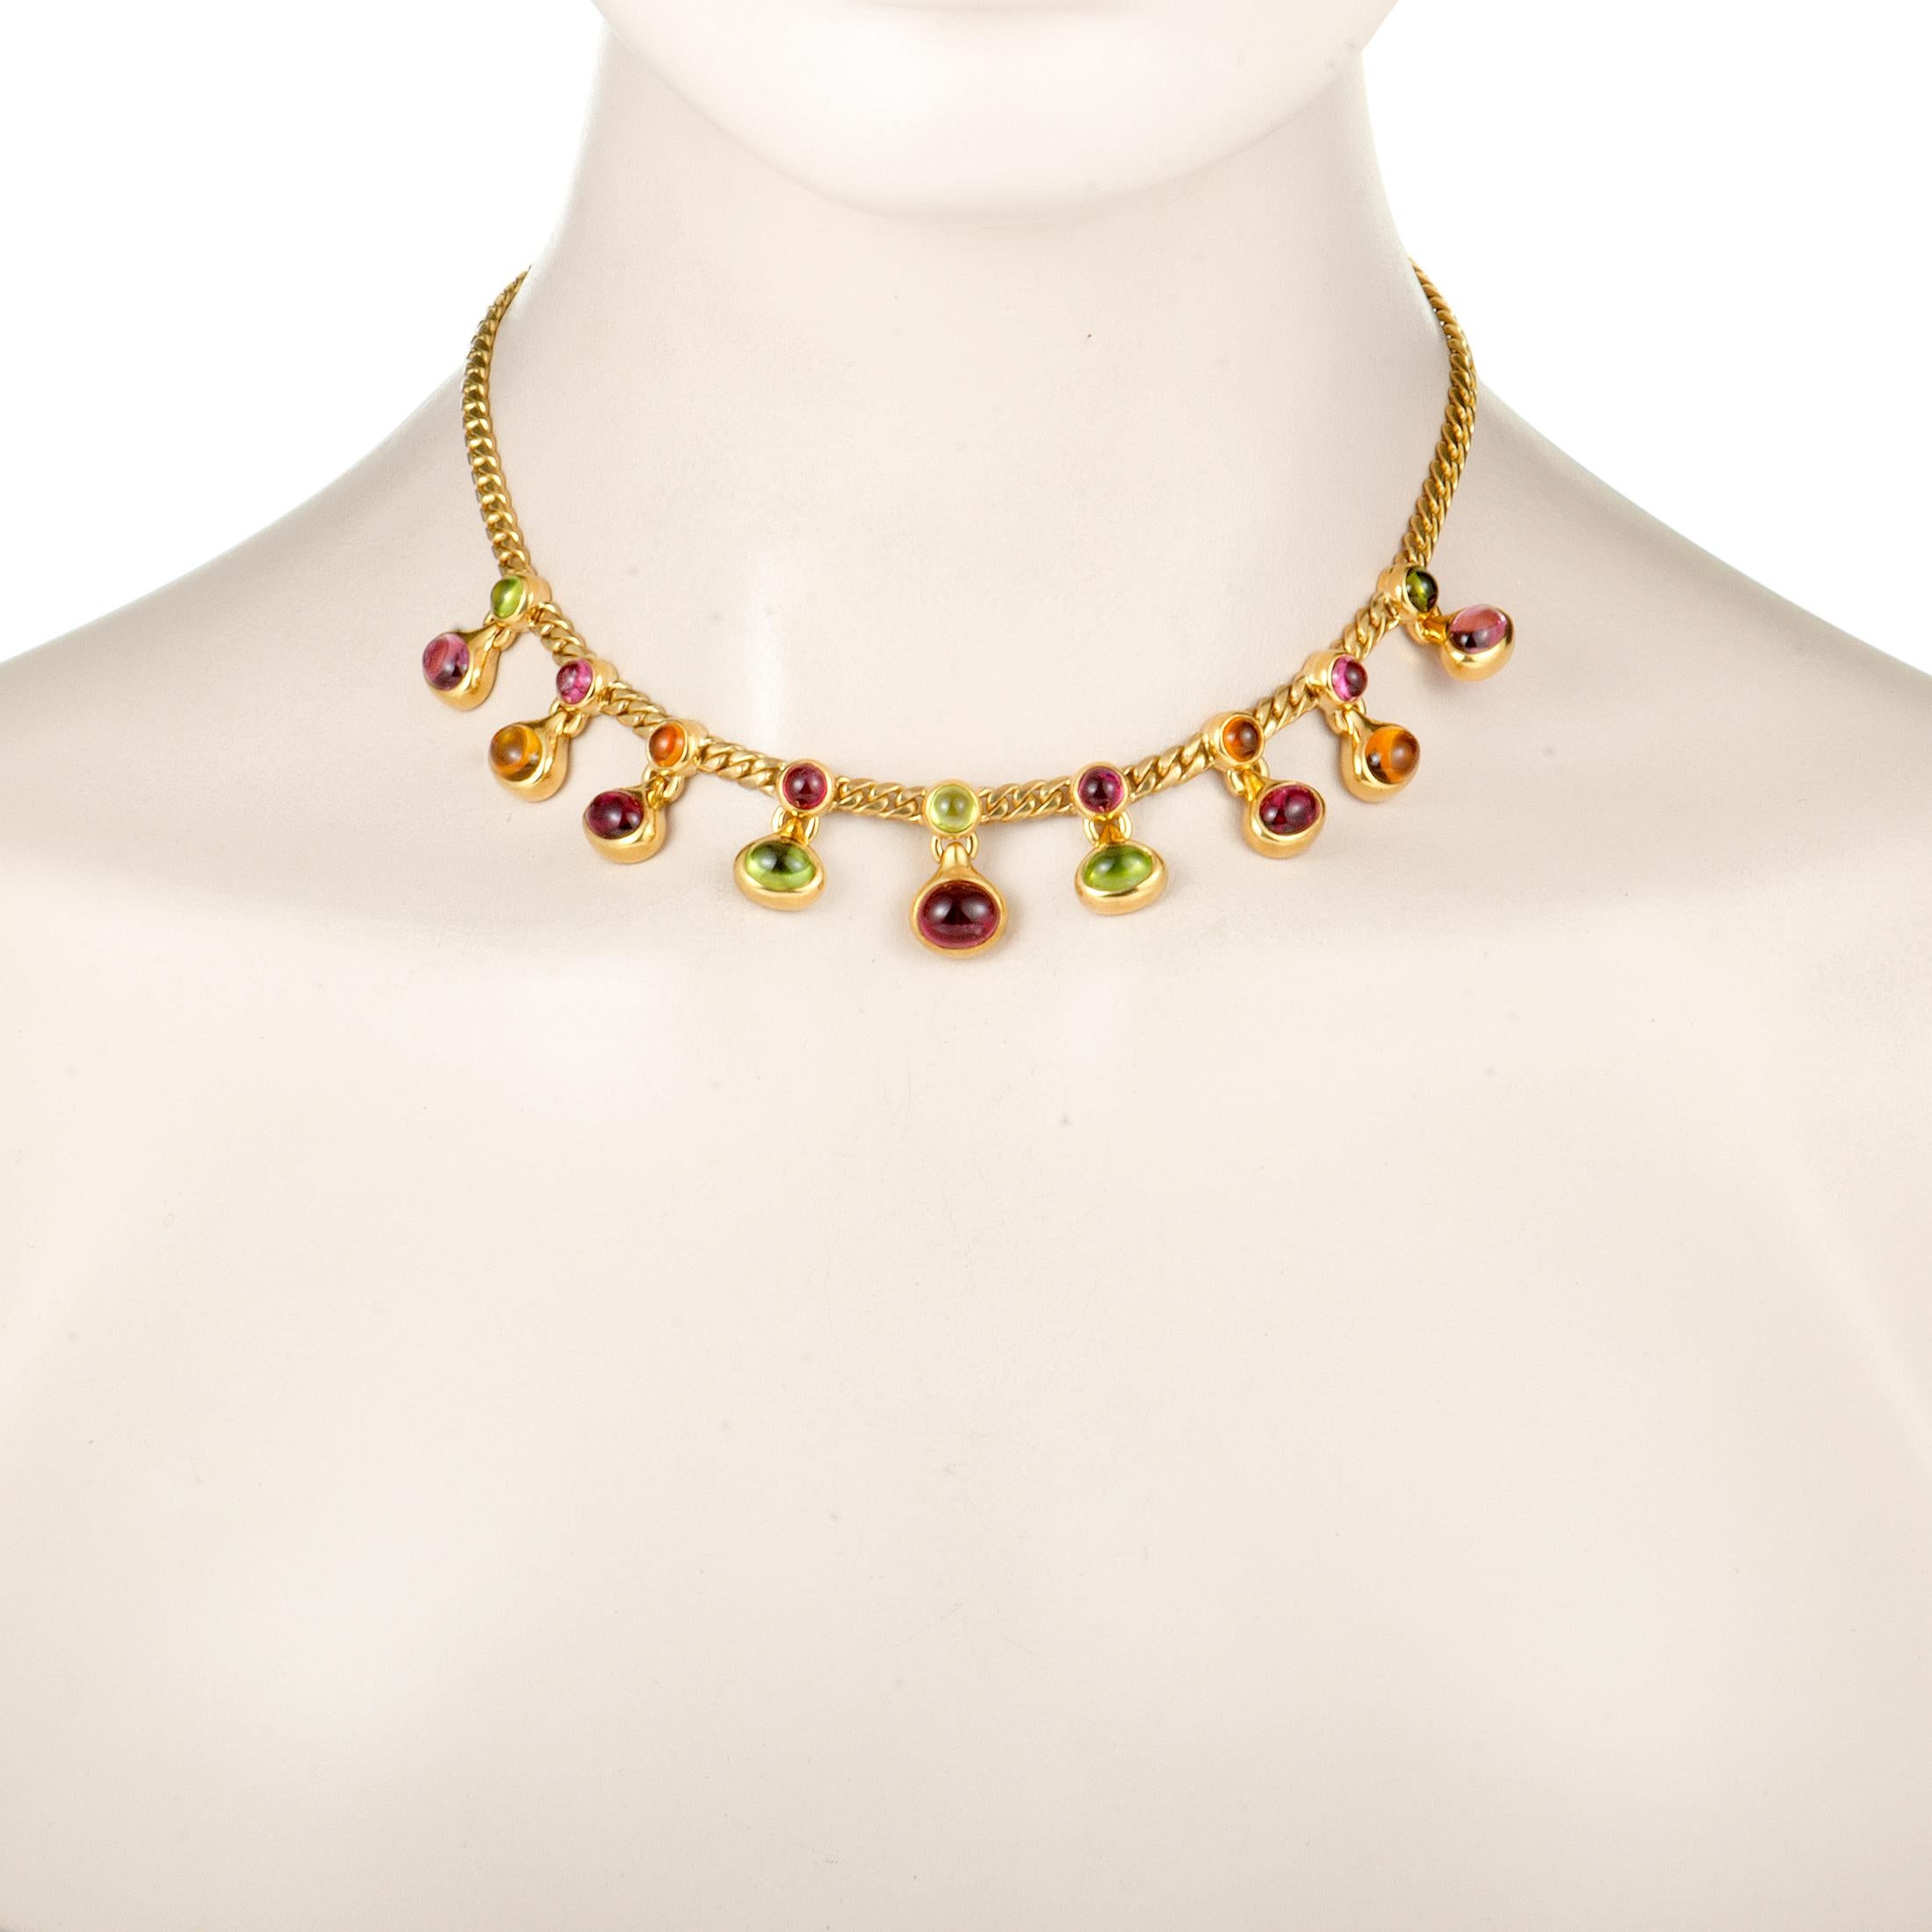 Designed in an incredibly stylish manner and attractively decorated with colorful gems, this gorgeous vintage necklace is a statement piece that will add a fashionable touch to any ensemble of yours. The necklace is presented by Bvlgari and